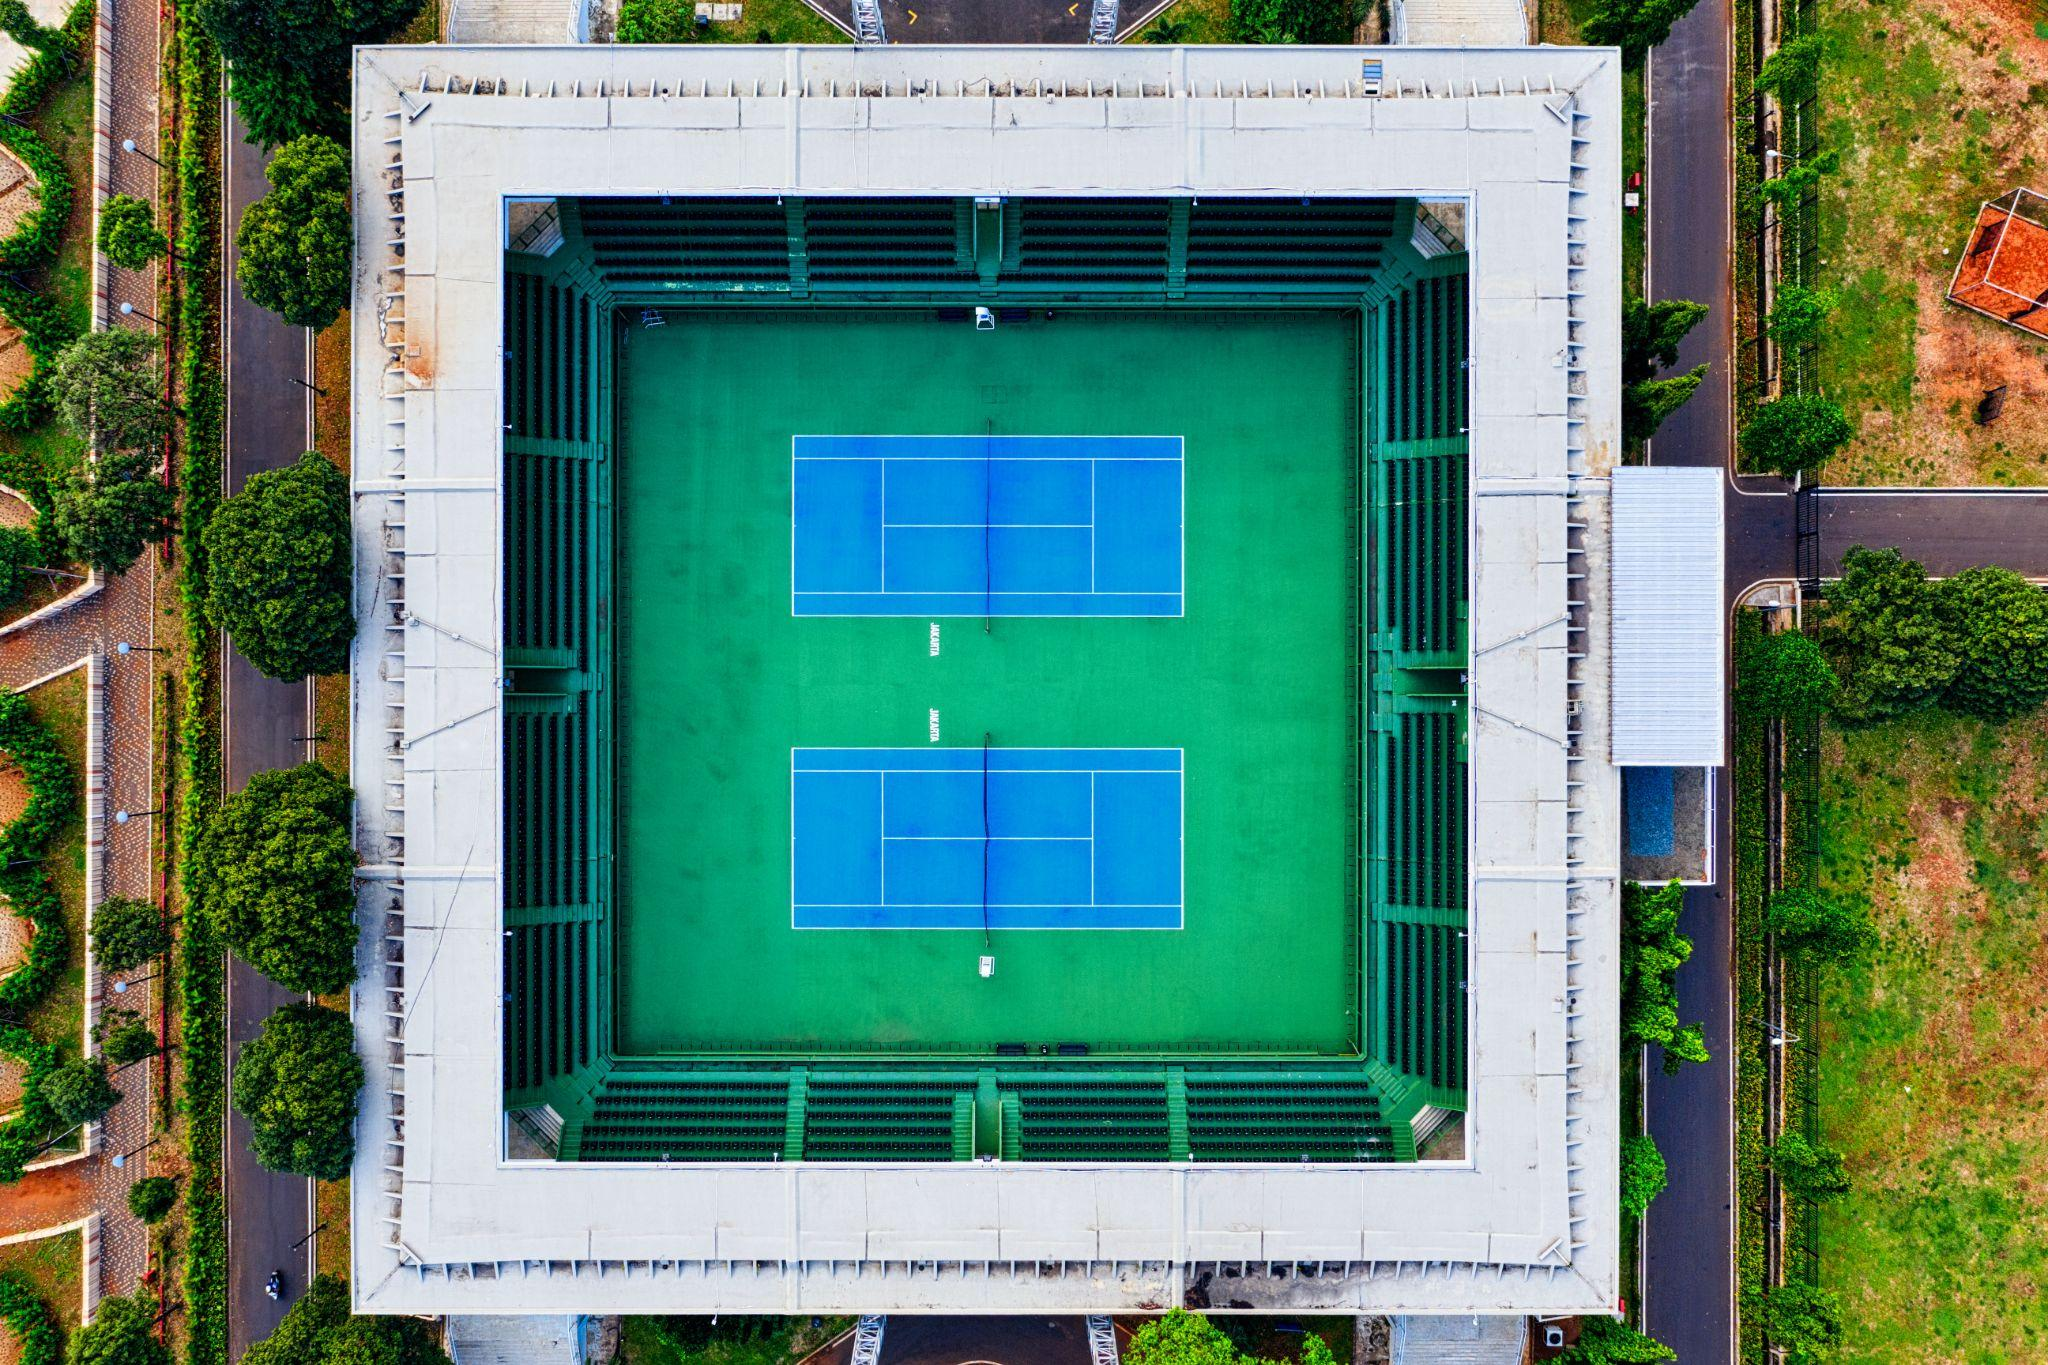 Aerial view of a tennis court